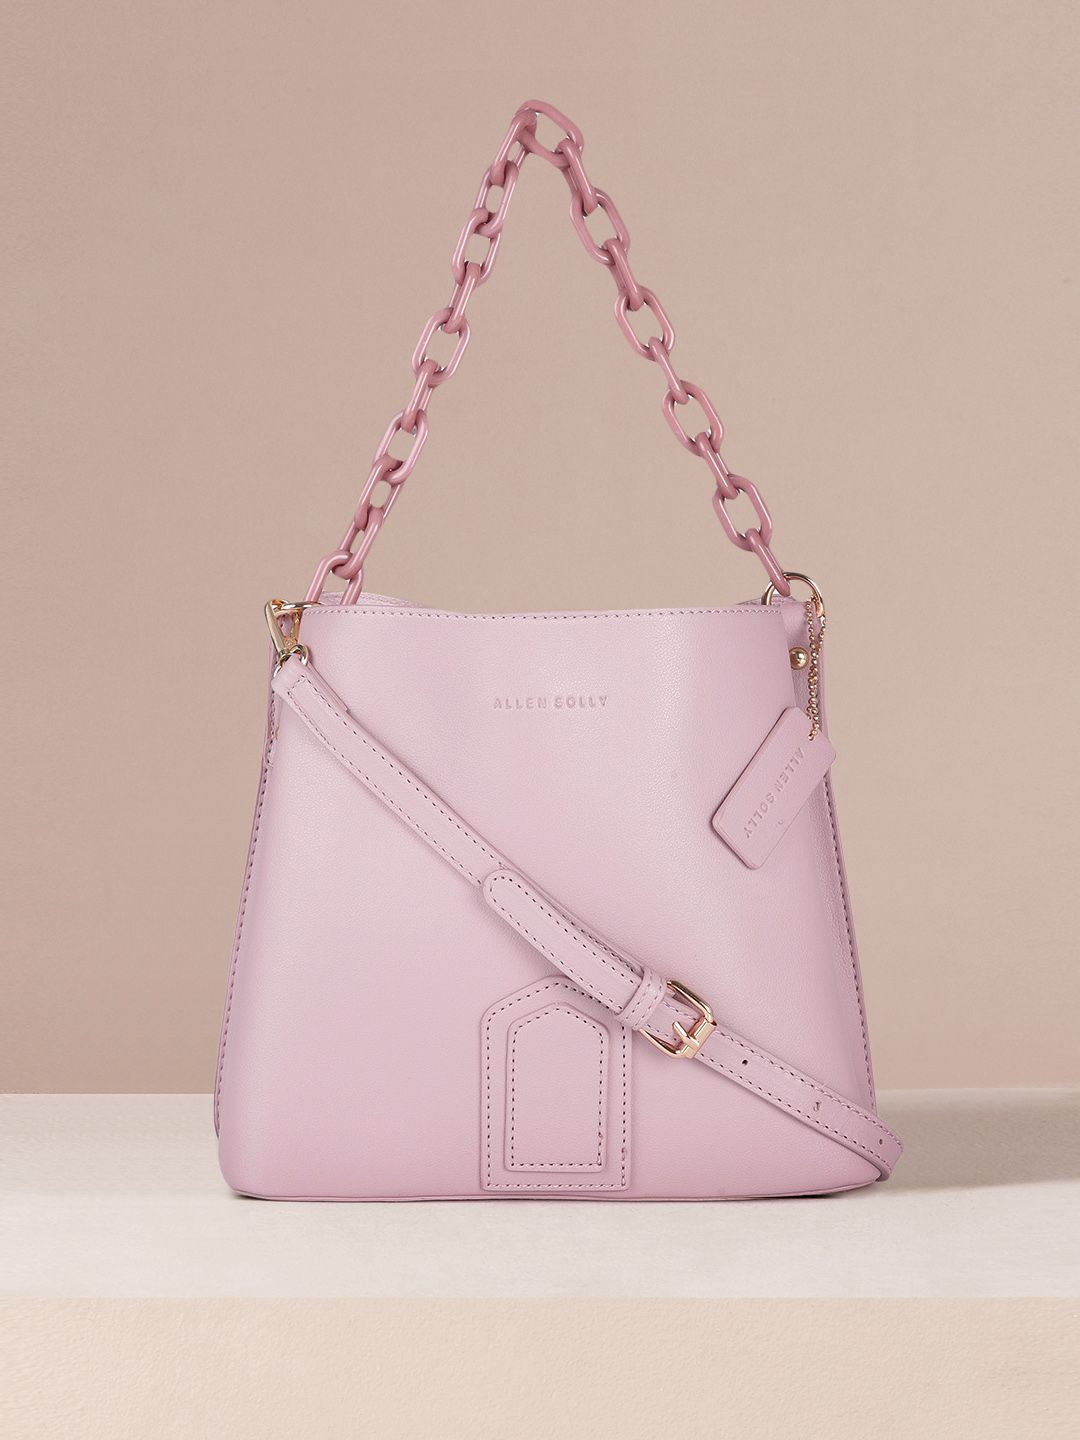 Allen Solly Pink Solid Hobo Bag Price in India